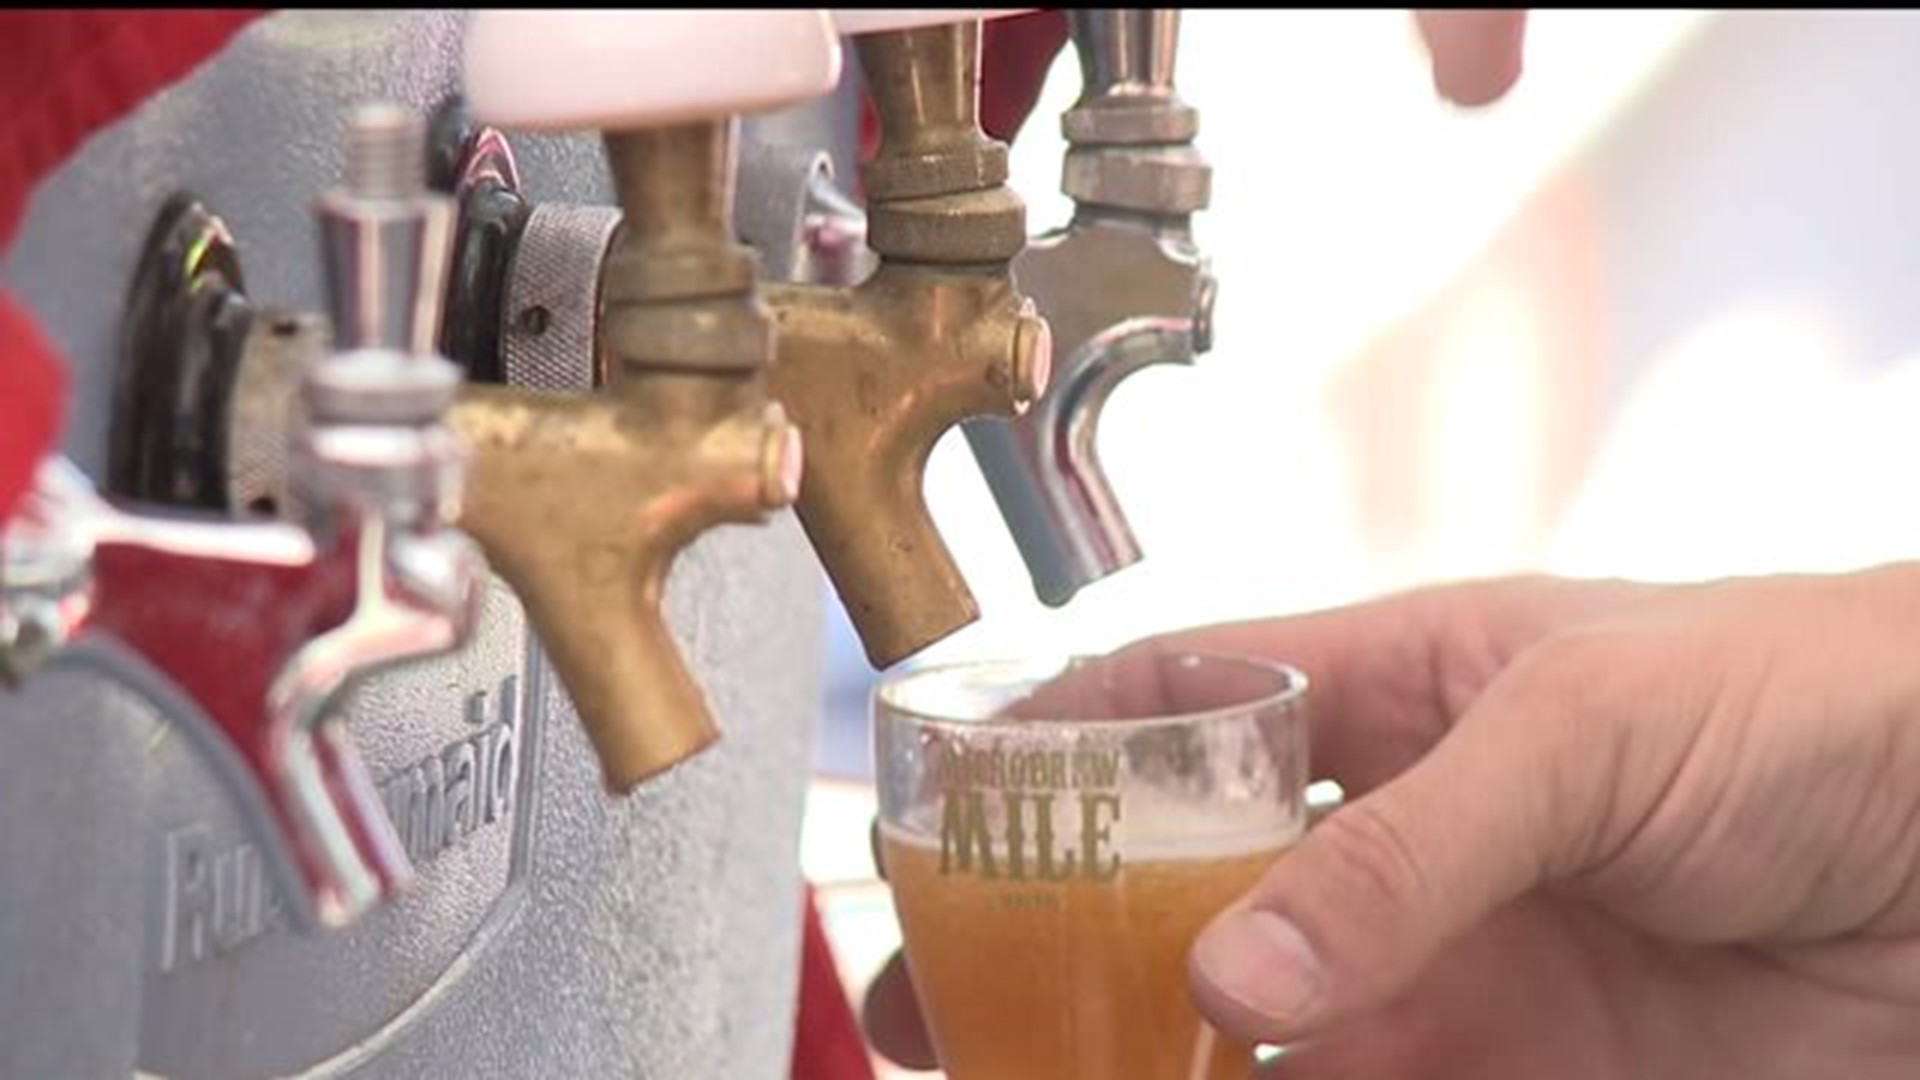 Micro Brew Mile Craft Beer Festival